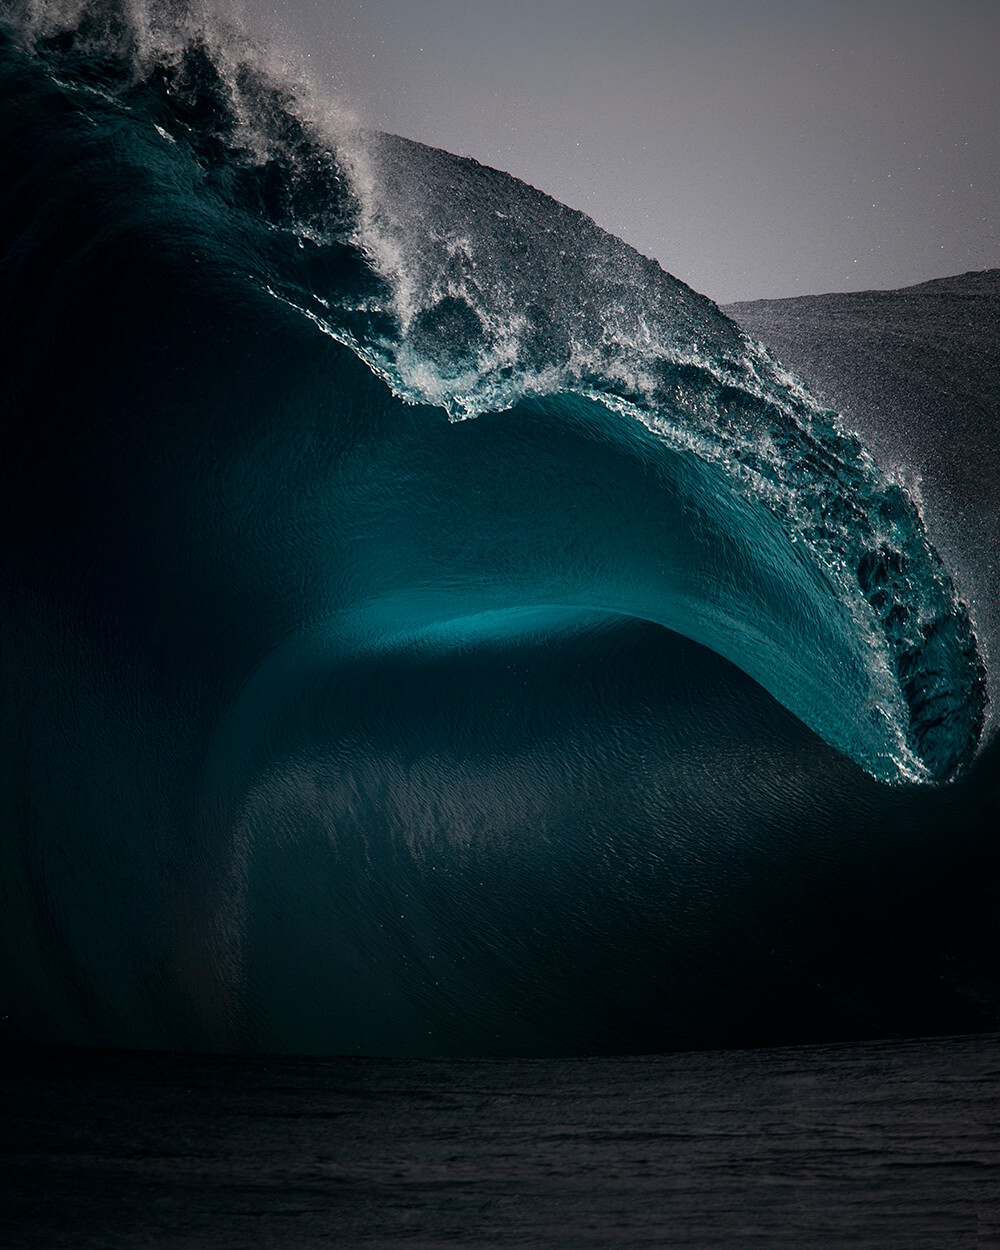 Australian Photographer Has Spent A Decade Capturing Waves, And The Result Is Magical